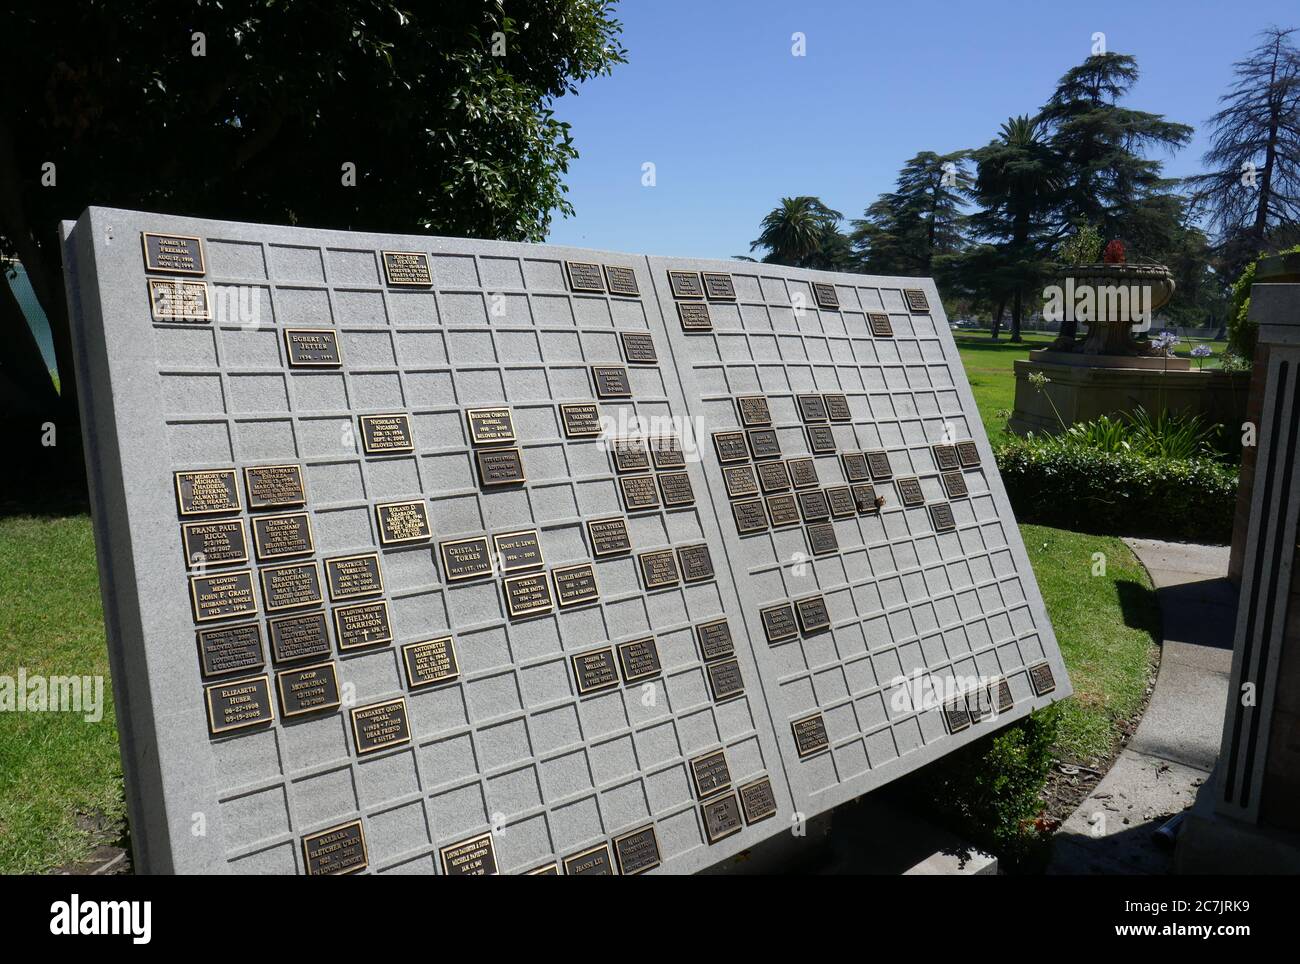 North Hollywood, California, USA 17th July 2020 A general view of atmosphere of Jon-Erik Hexum's Cenotaph and Memorial on July 17, 2020 at Valhalla Memorial Park in North Hollywood, California, USA. Photo by Barry King/Alamy Stock Photo Stock Photo